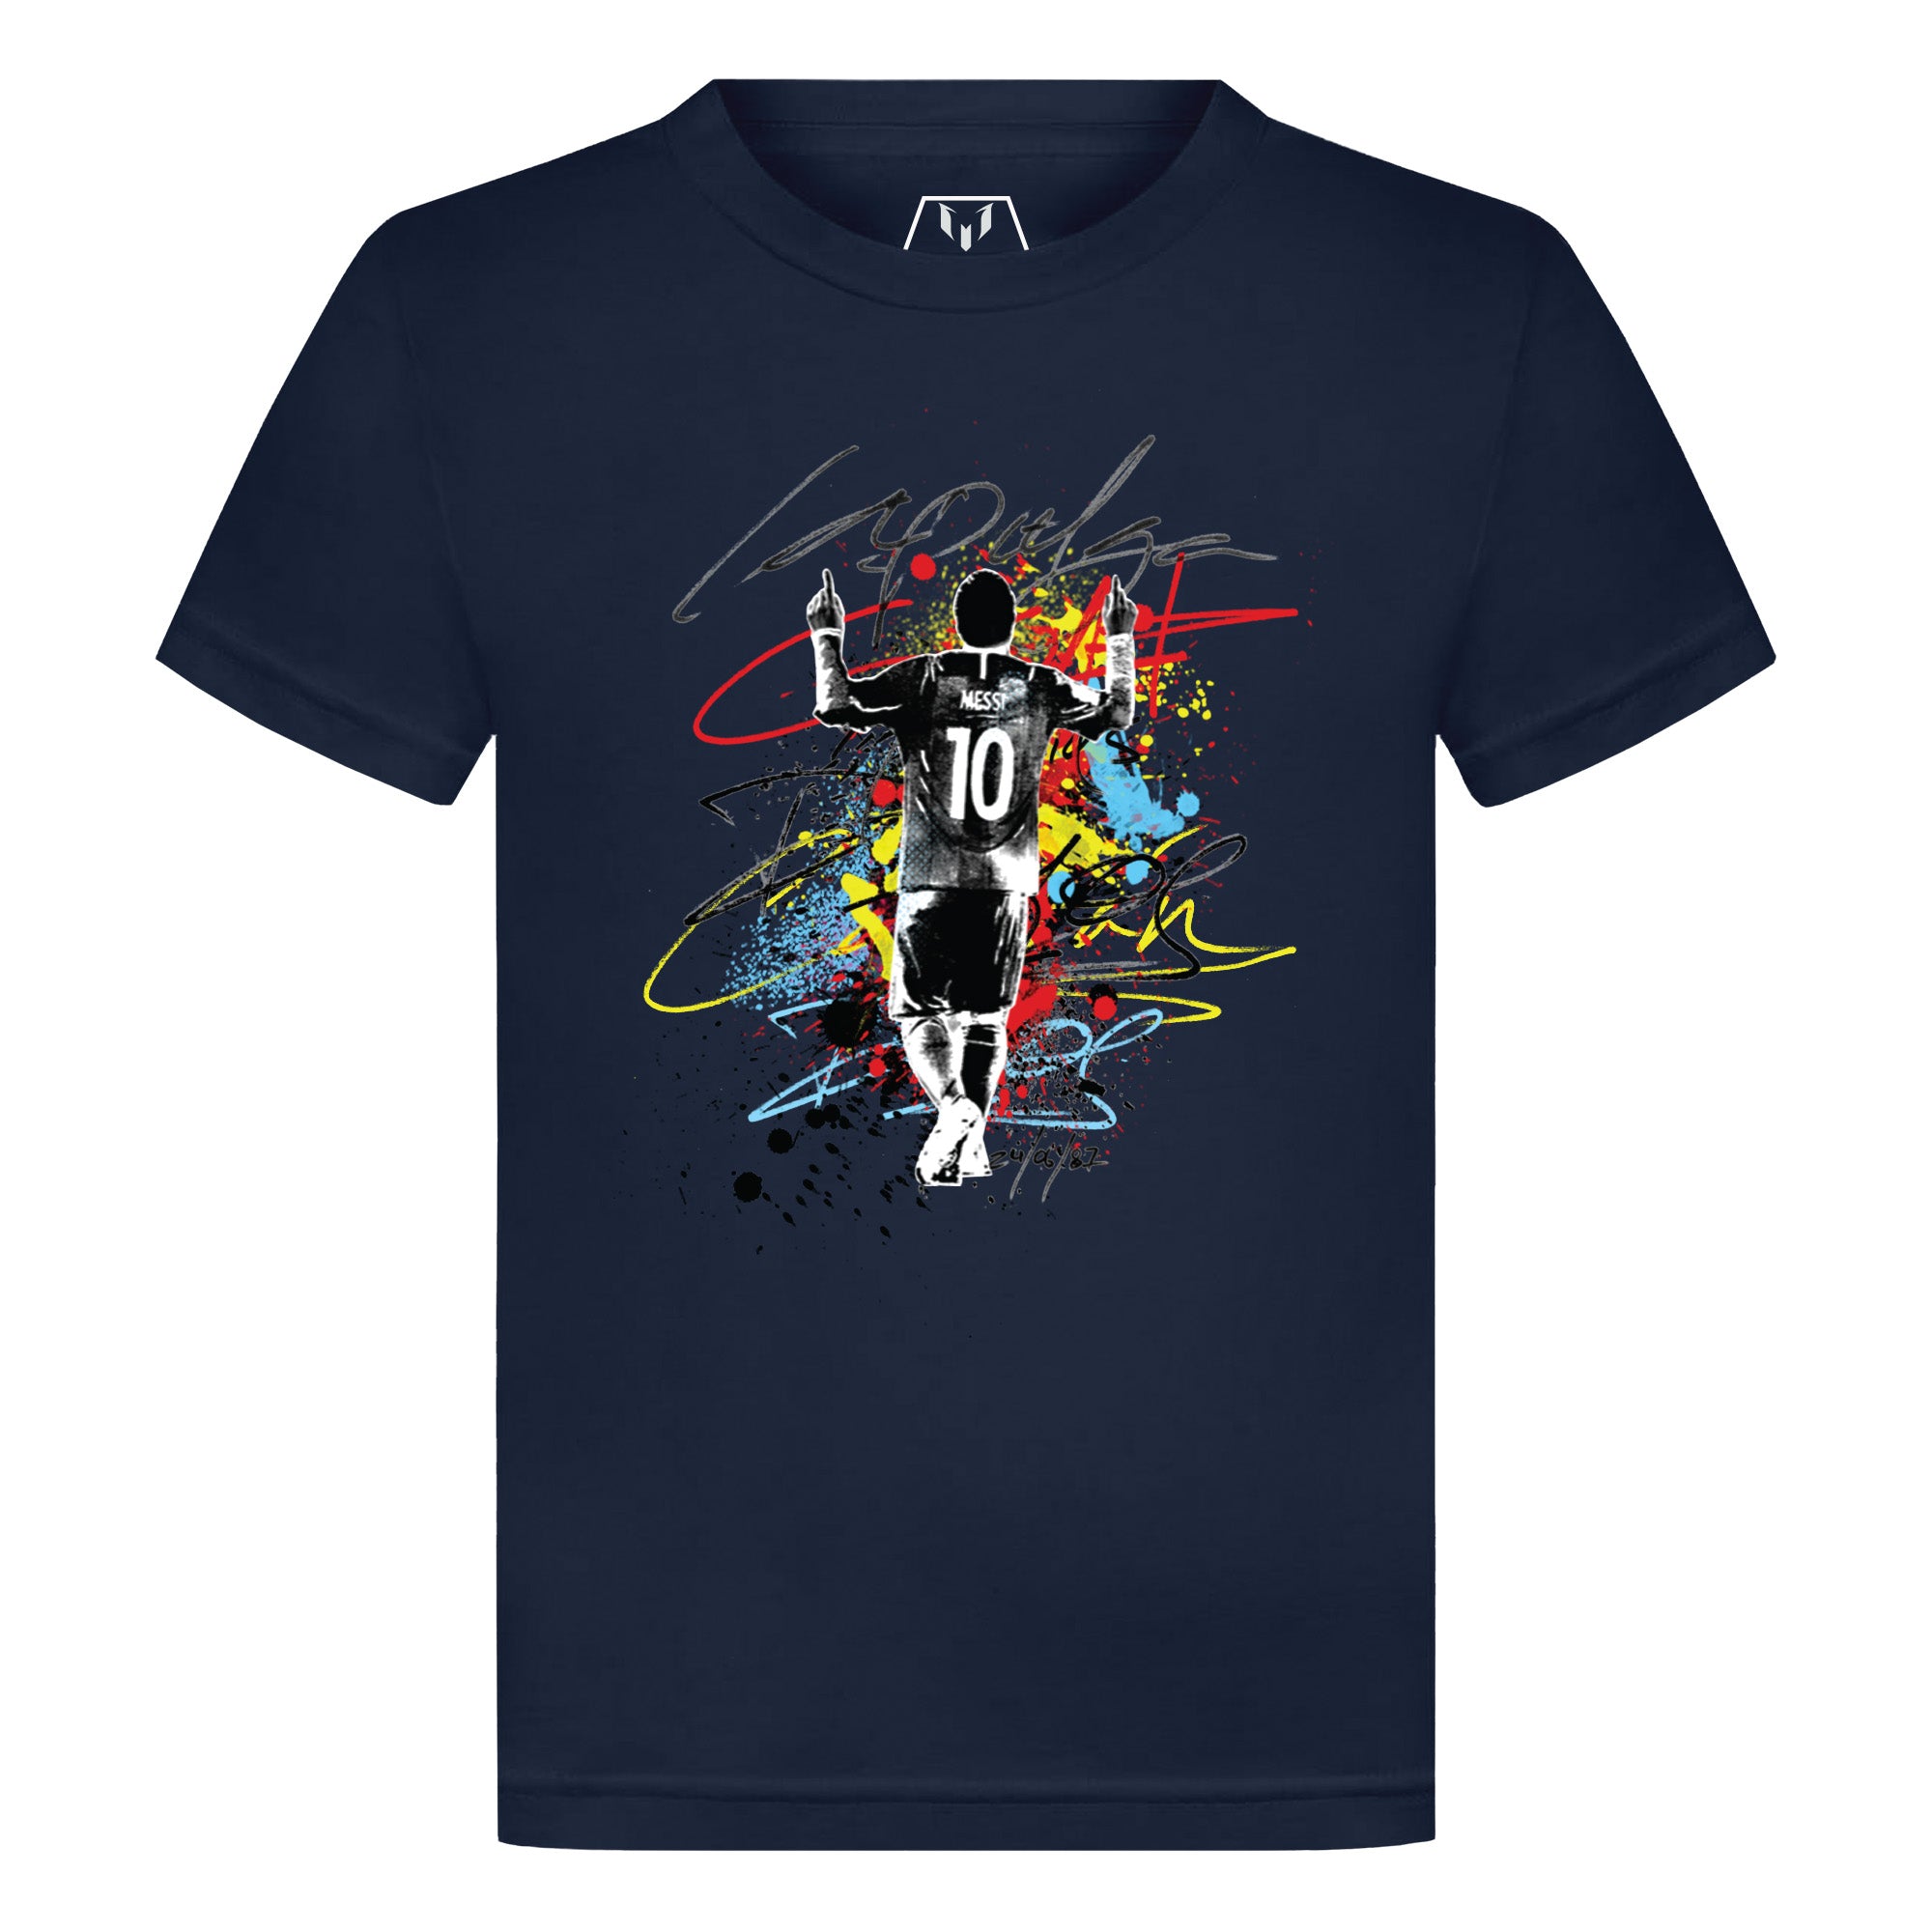 Shop Graphic T-Shirts at Messi Messi | Store Store The The